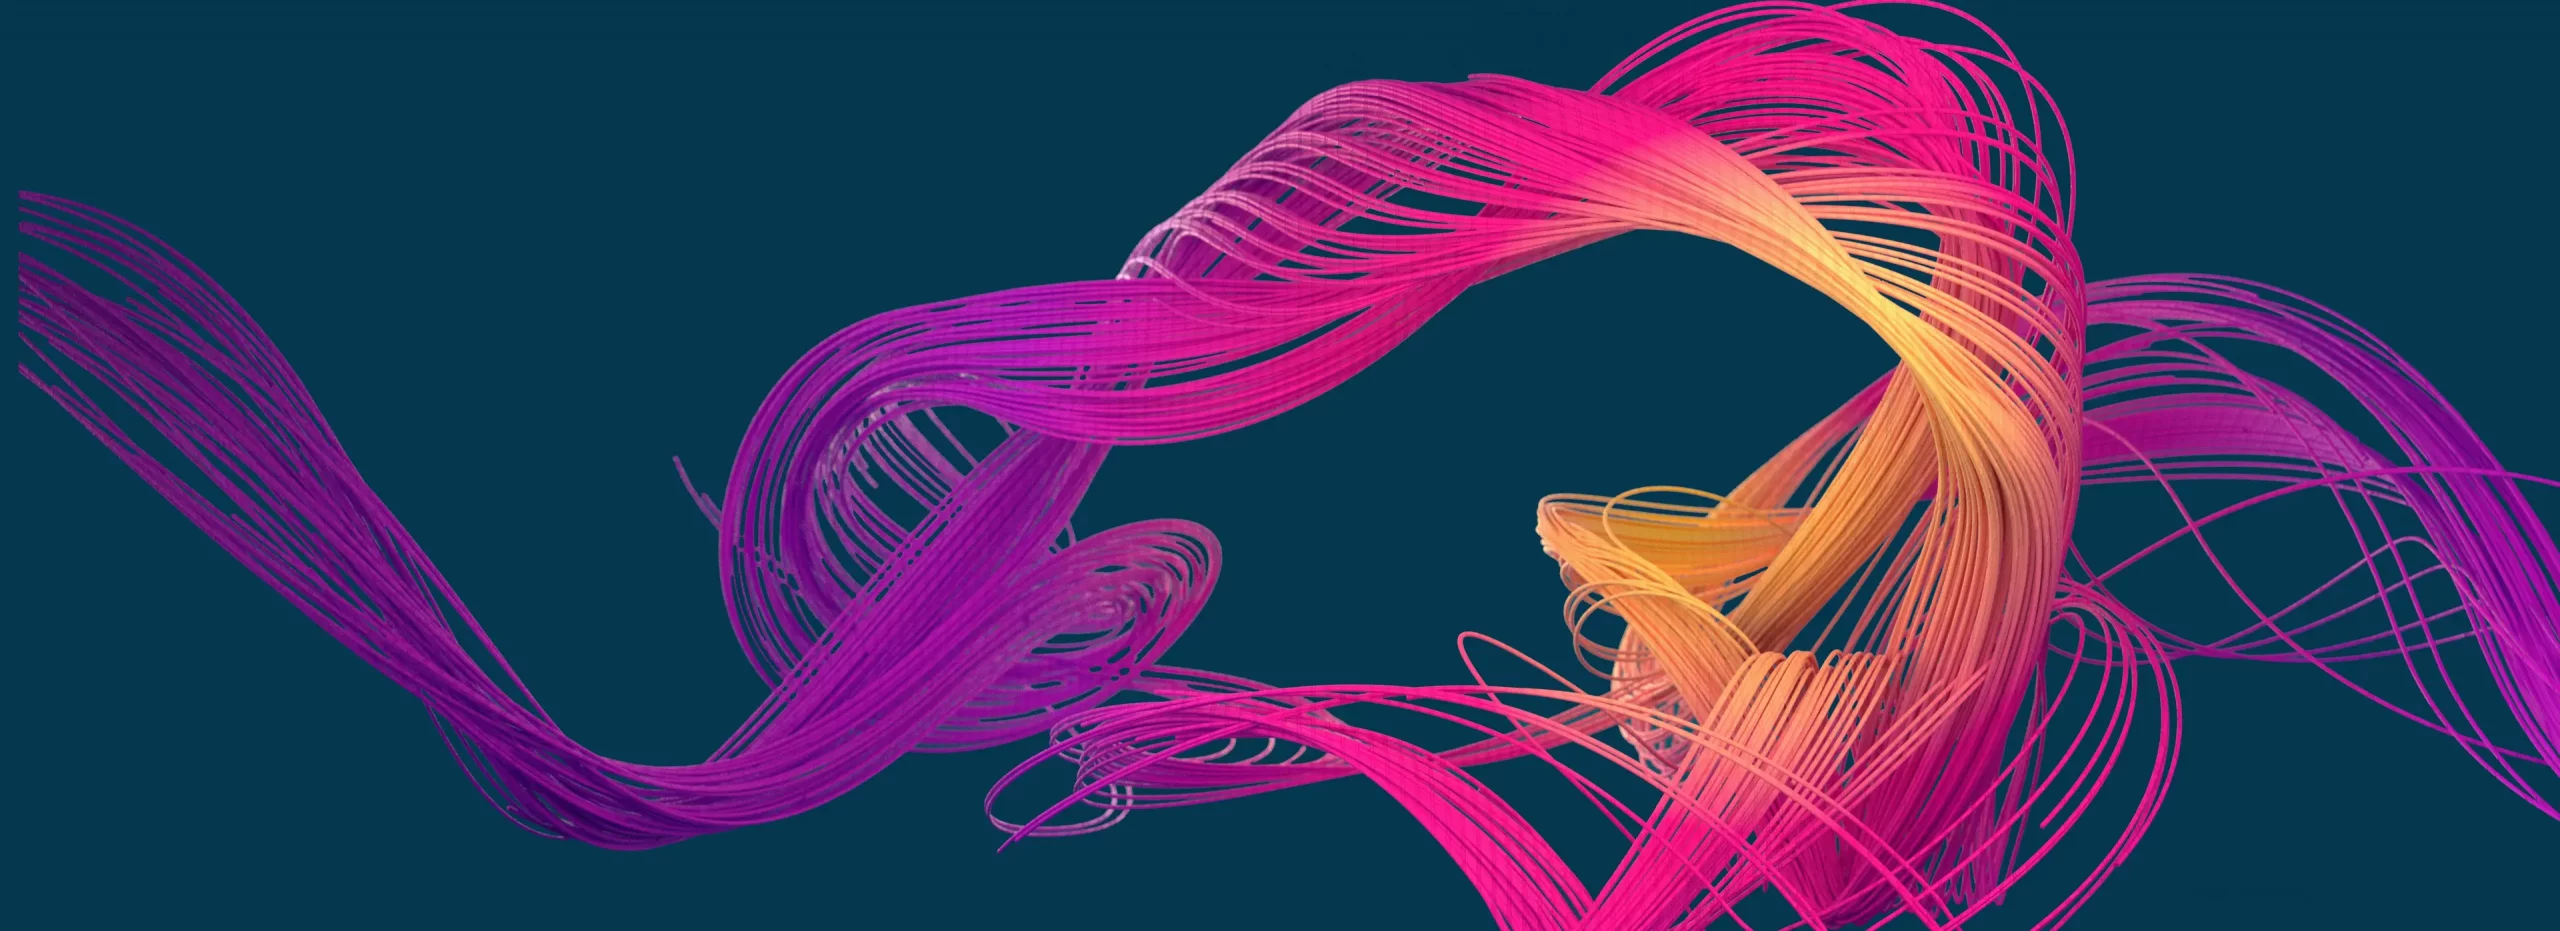 Neon spaghetti HIGH RES scaled